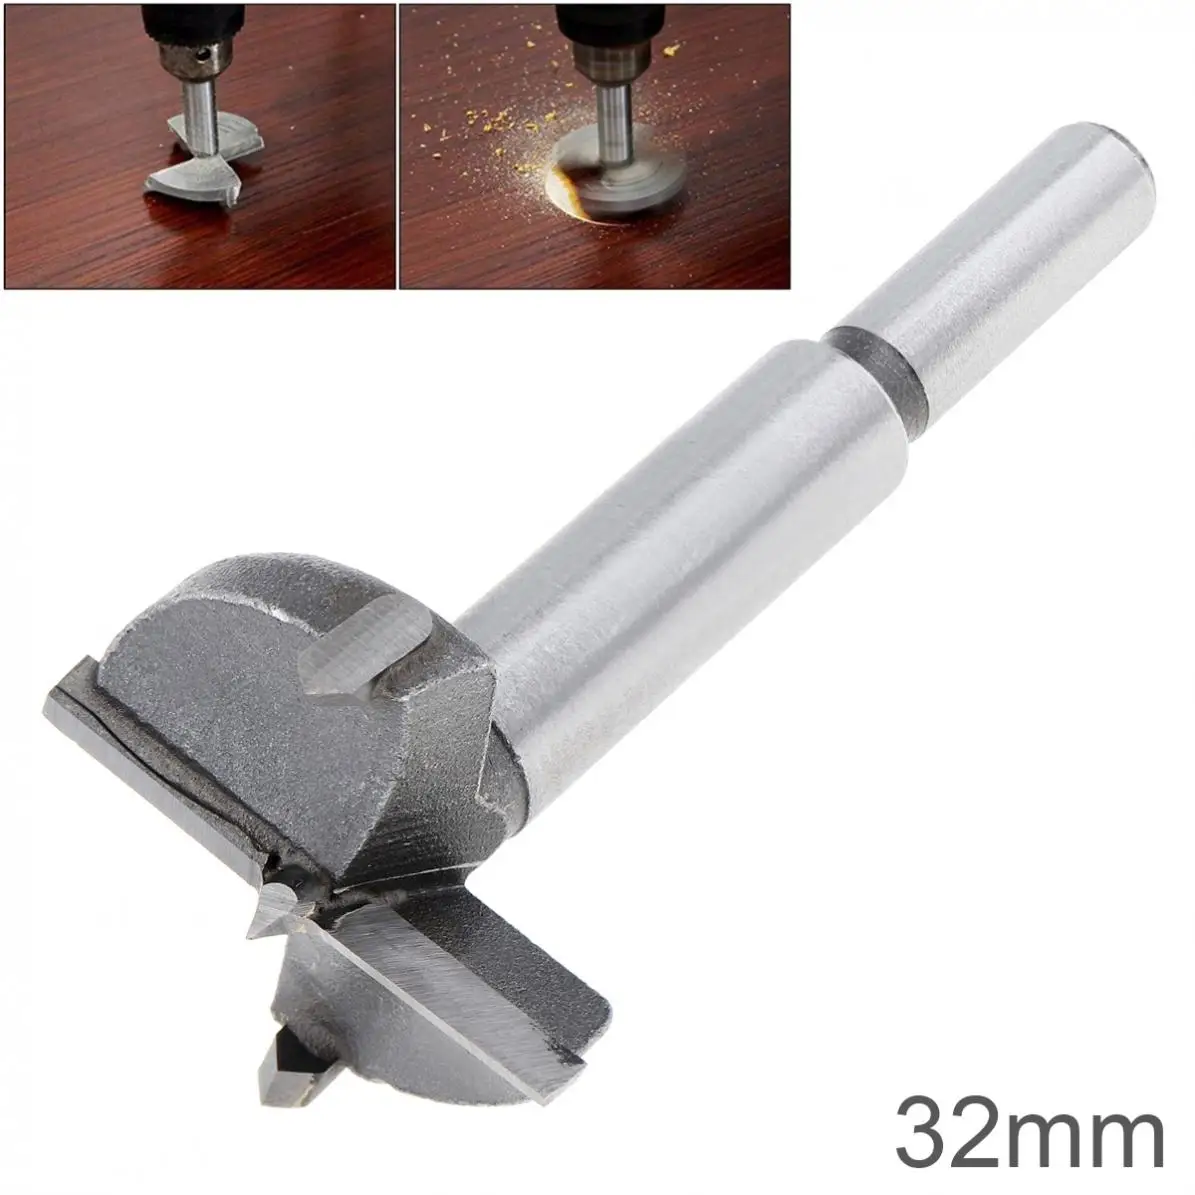 32mm Tungsten Steel Hard Alloy Wood Drill Bits Woodworking Hole Opener for Drilling on Plasterboard / Wooden Board woodworking milling cutter classical ogee bit tungsten carbide blades double r line knife cabinet door wooden board tenon joint